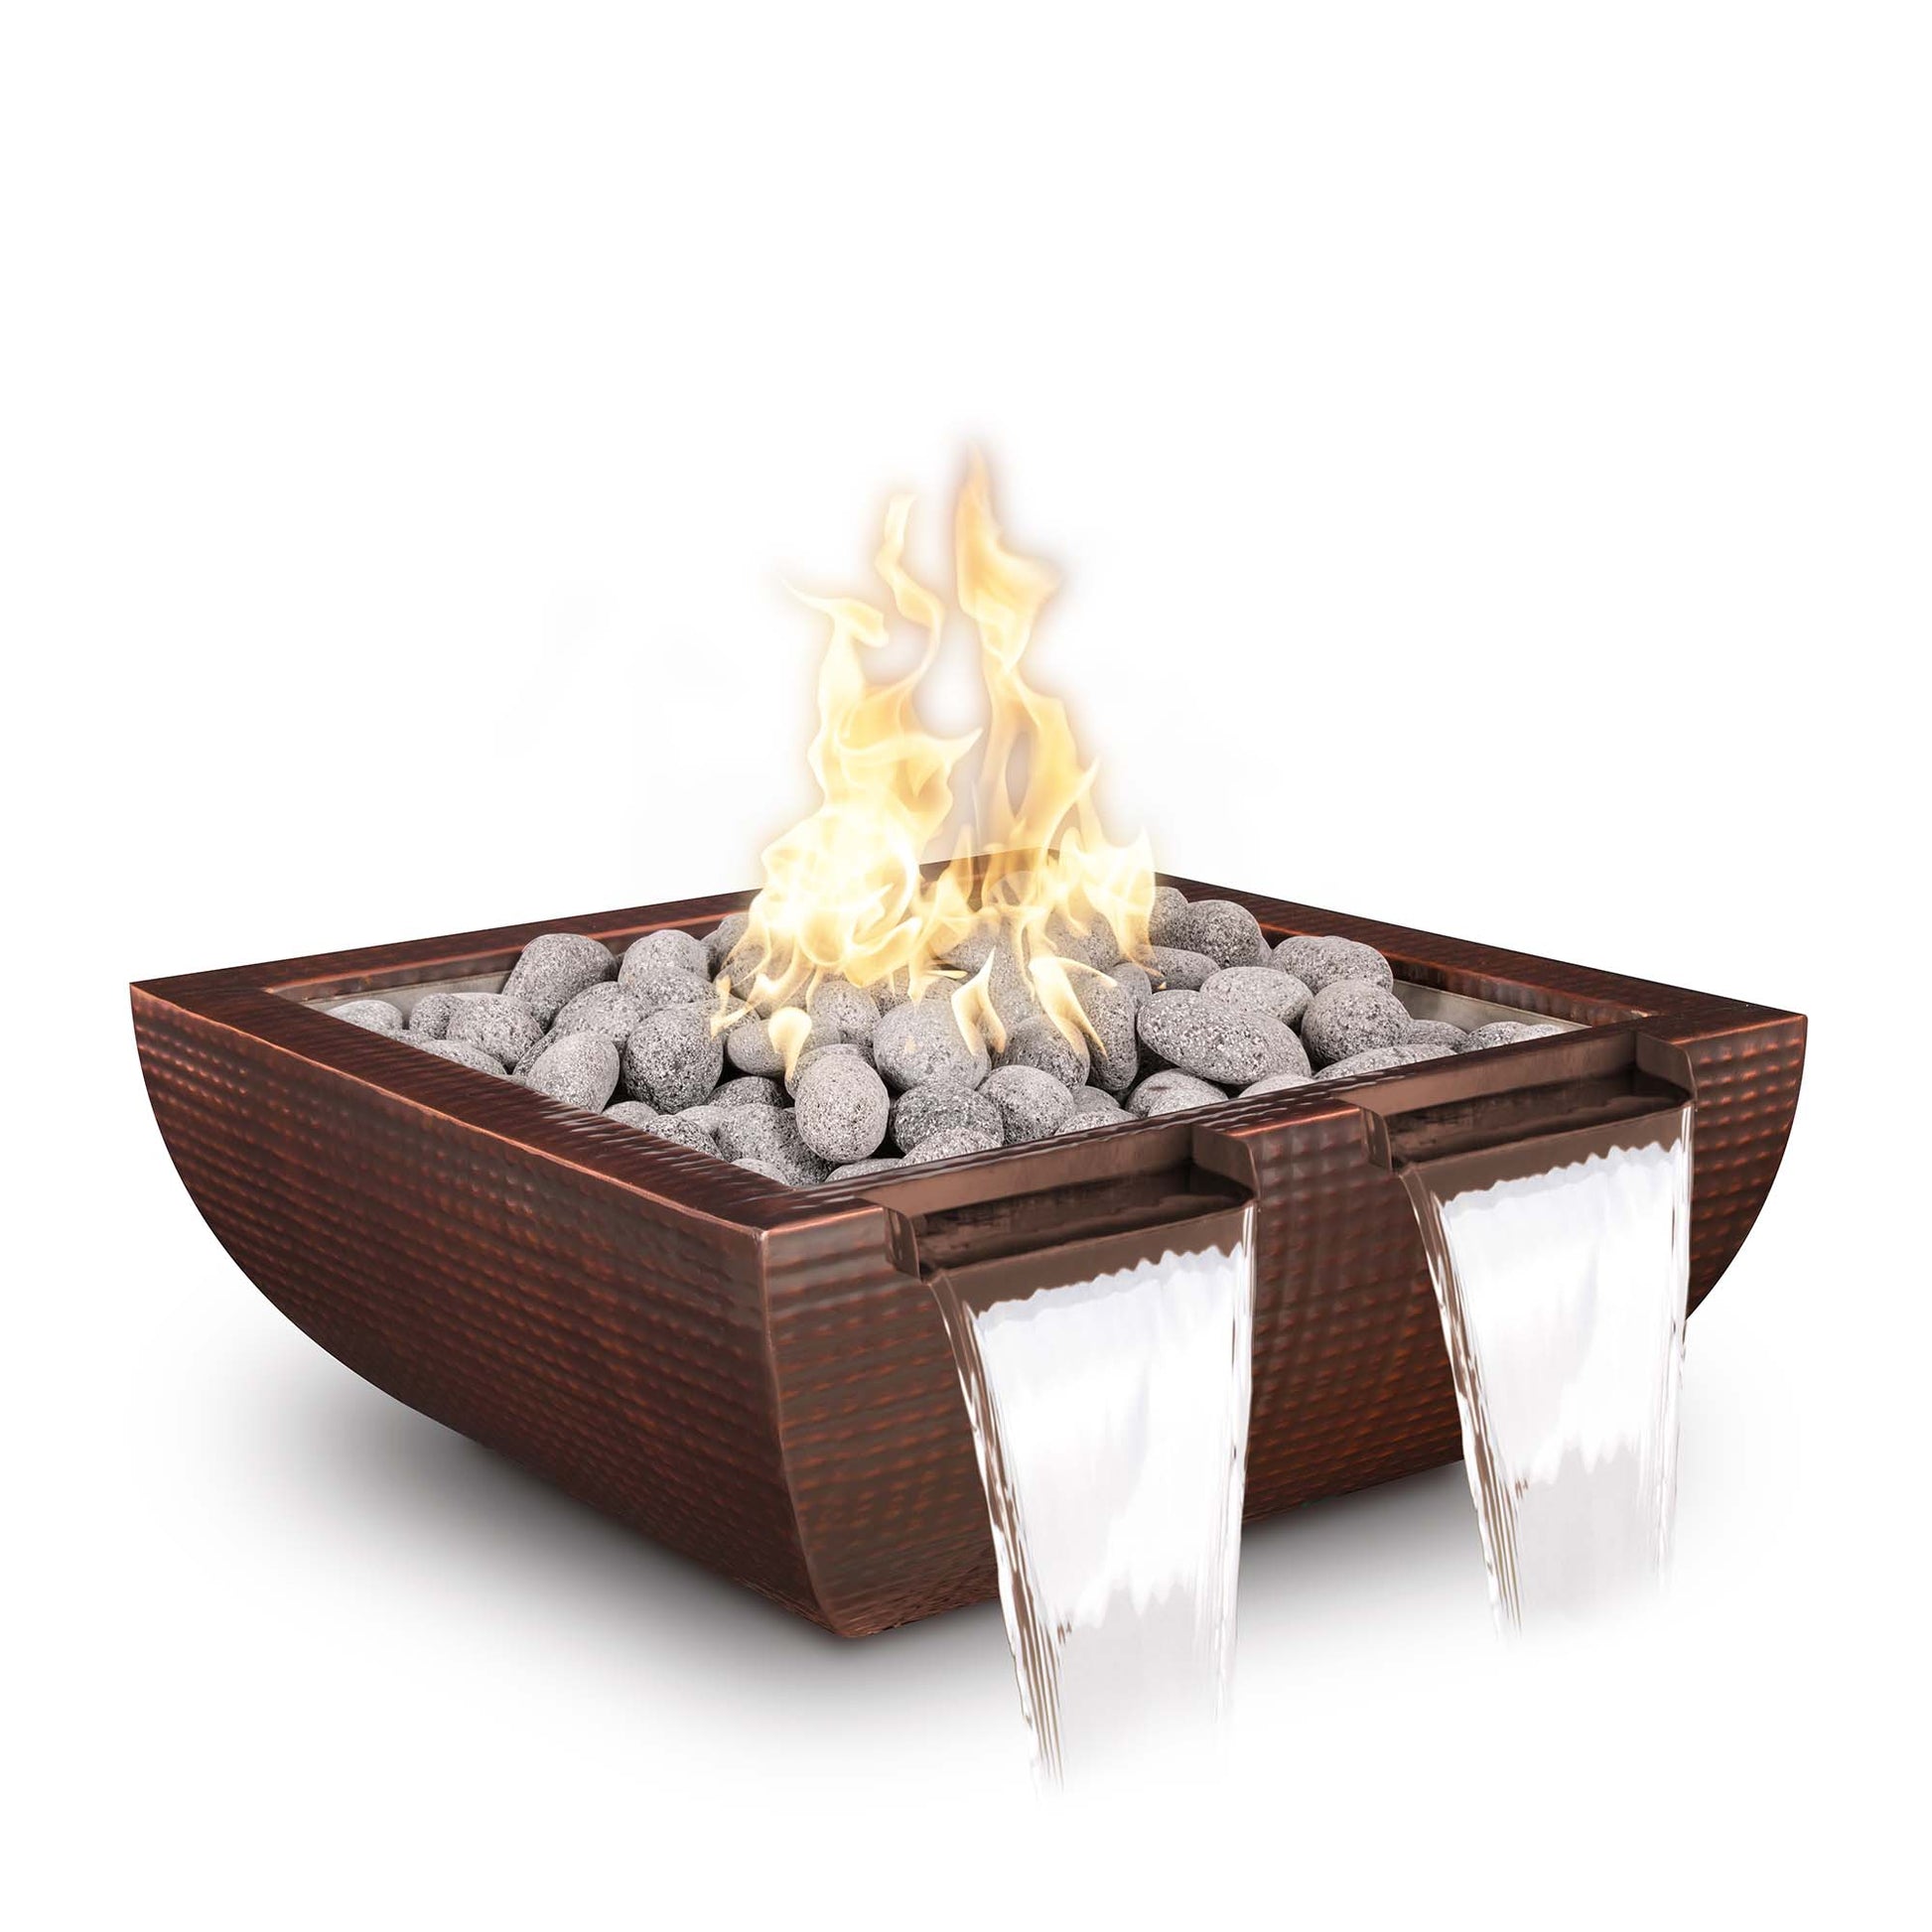 The Outdoor Plus Avalon Twin Spill 36" Pewter Powder Coated Metal Liquid Propane Fire & Water Bowl with Match Lit with Flame Sense Ignition